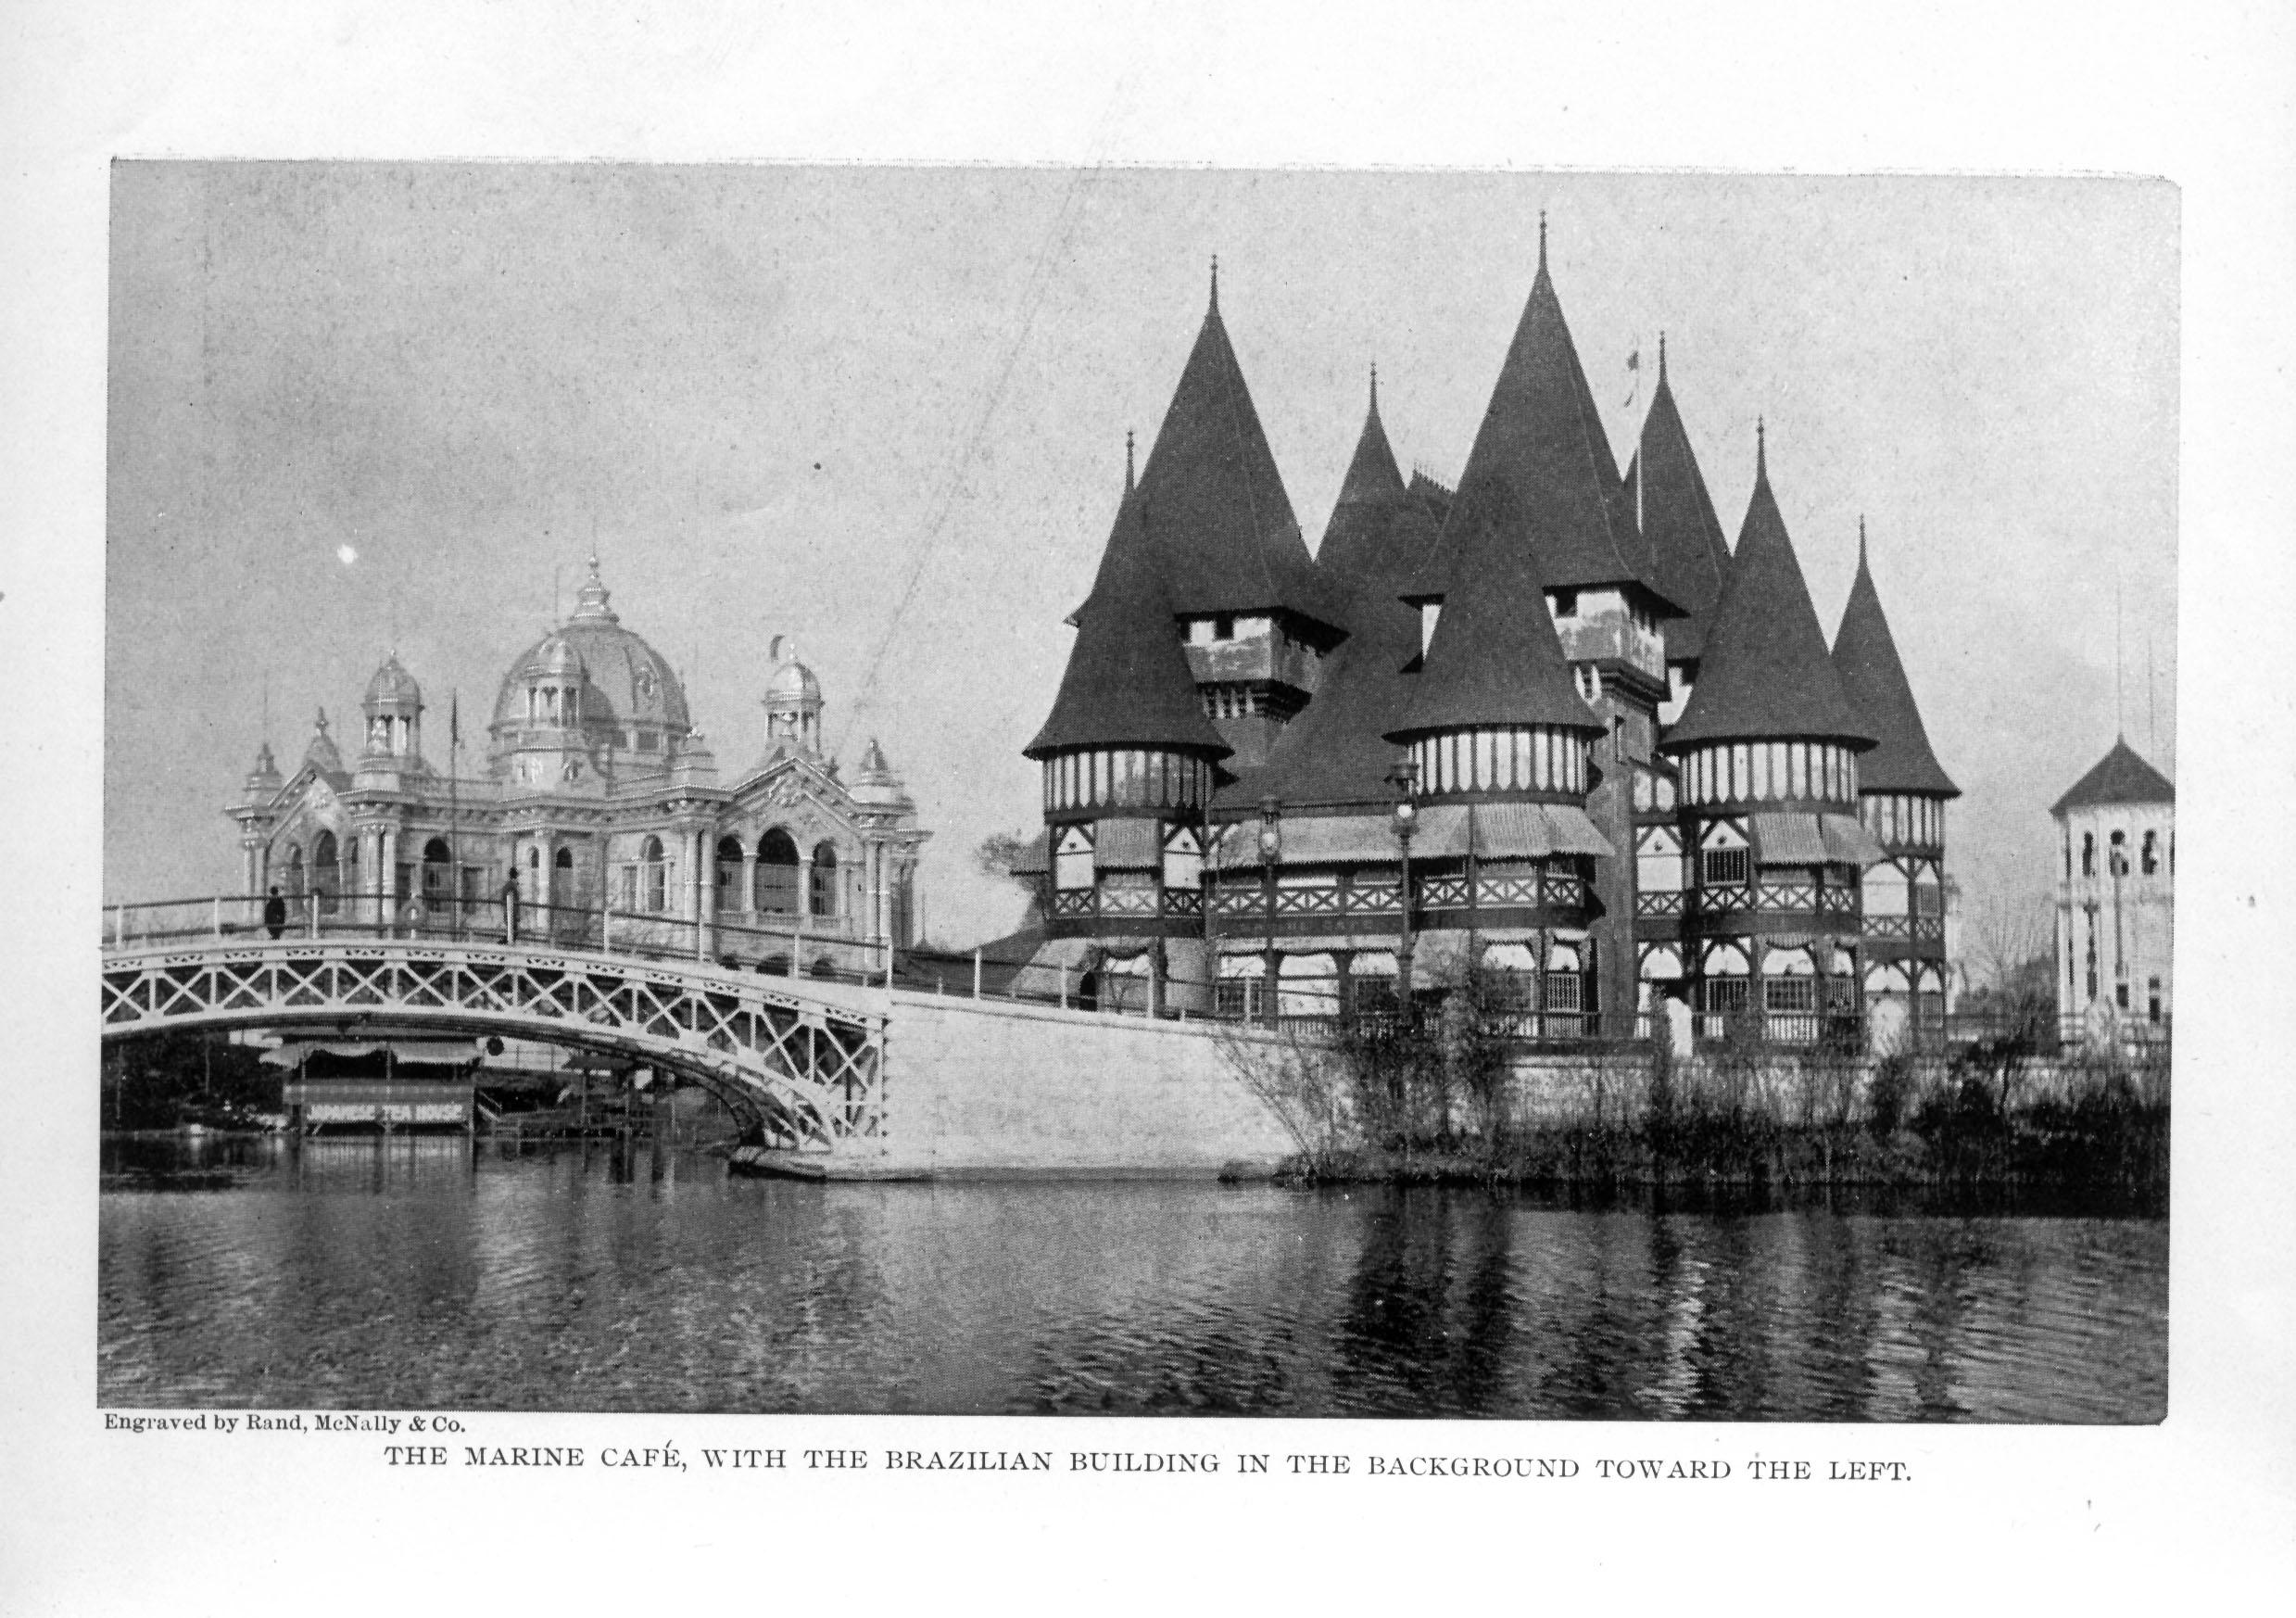 Tudor-esque building with many turrets on right and domed building on left, both by water's edge near a bridge